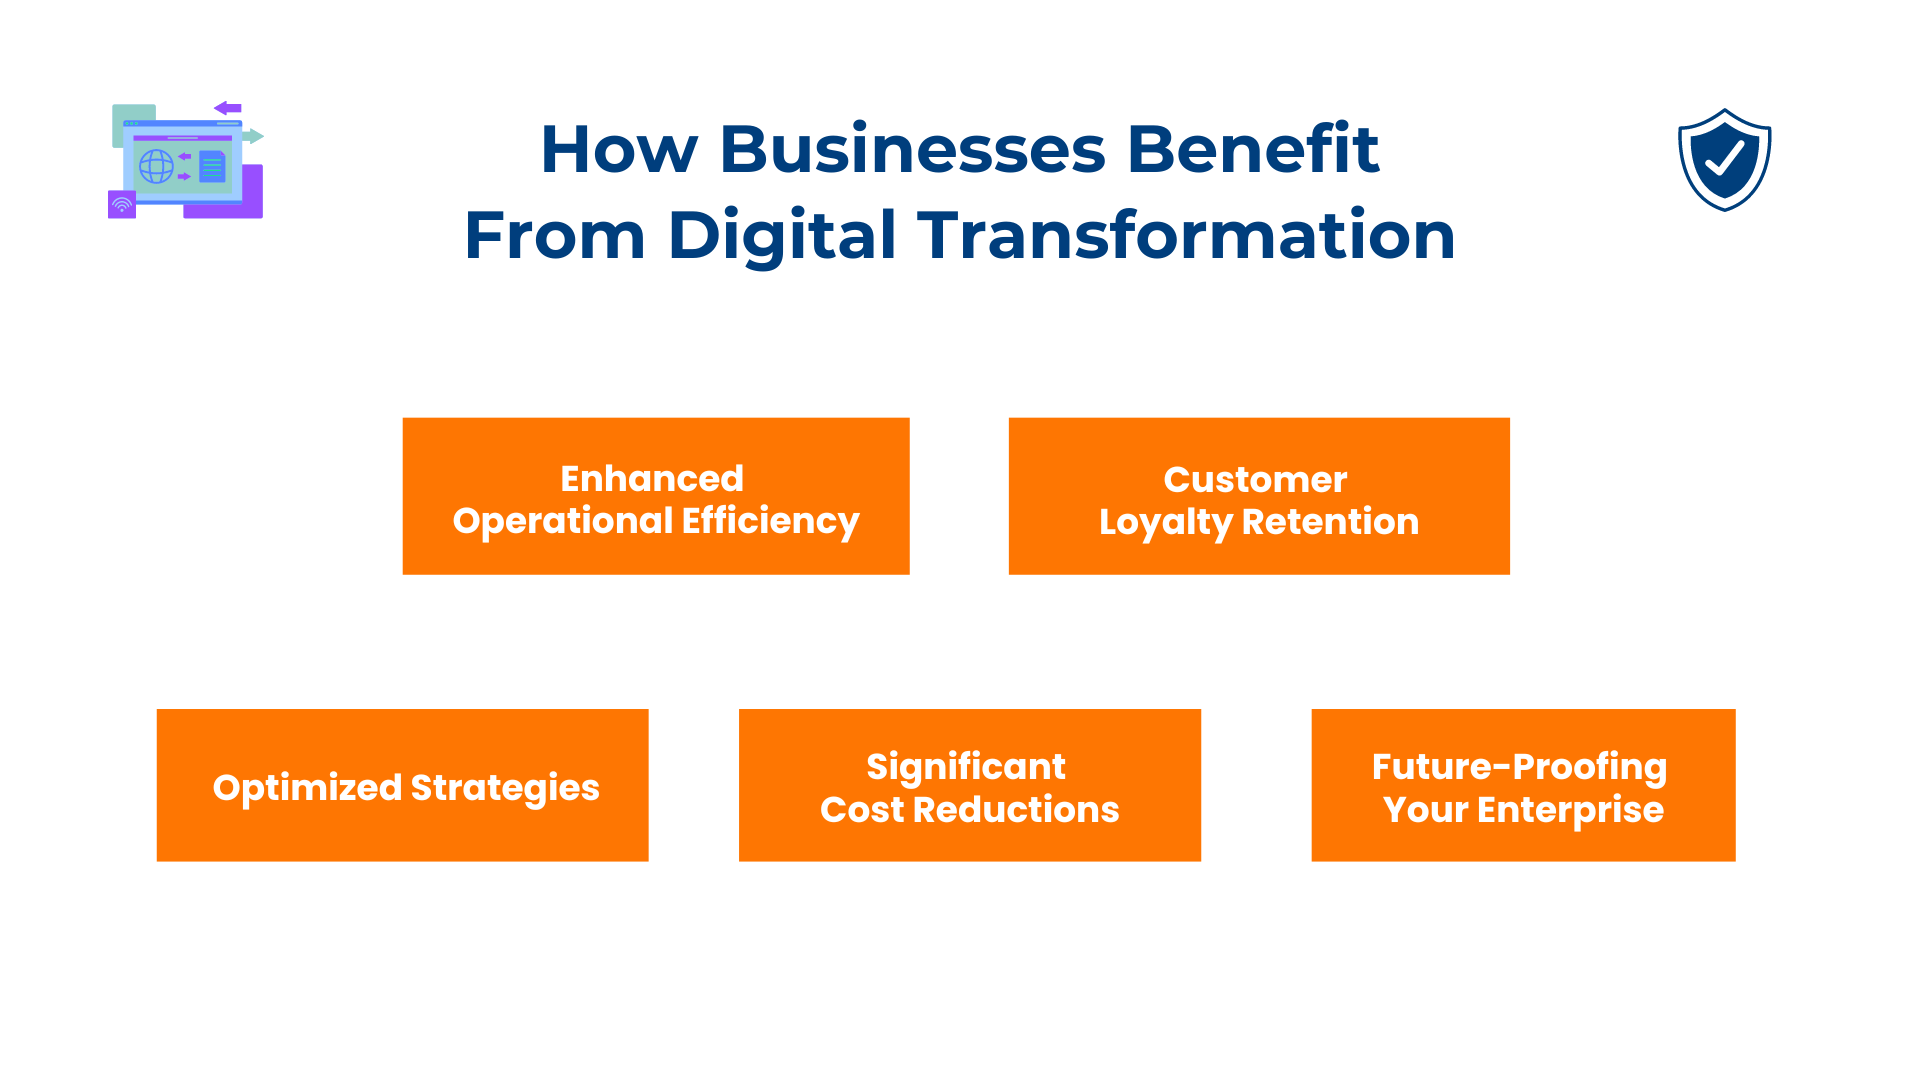 How Businesses Benefit From Digital Transformation